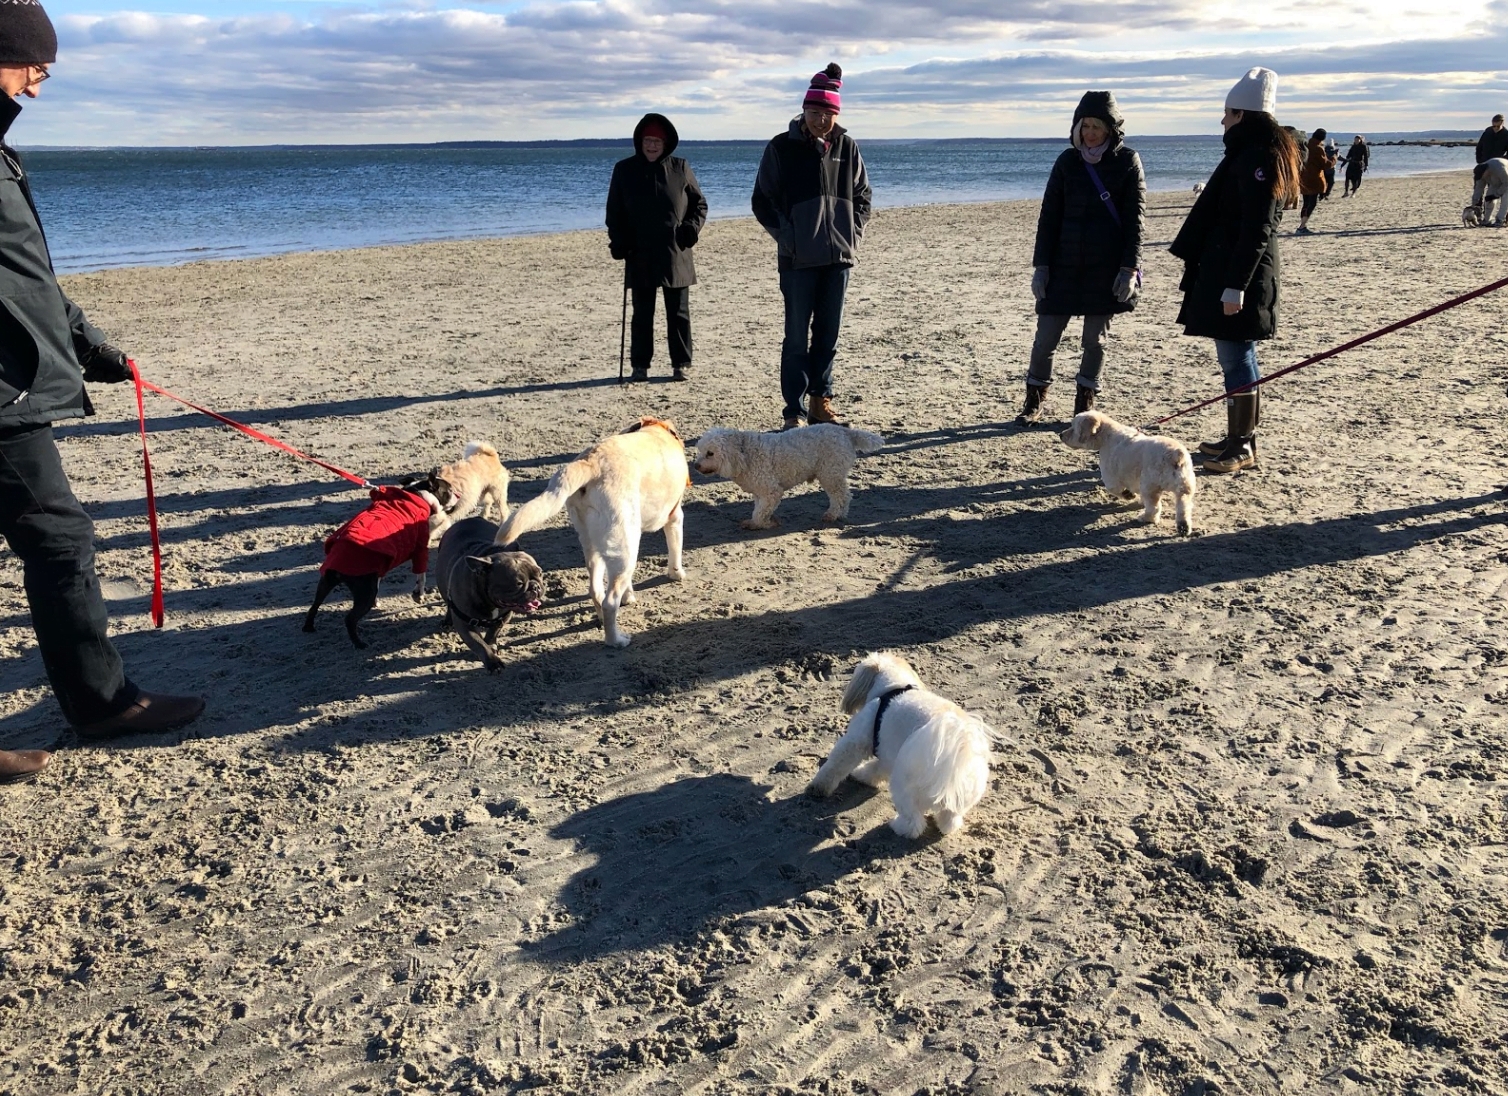 A group of dogs sniff each other while their owners look on. Dec 29, 2018 Photo: Avery Barakett